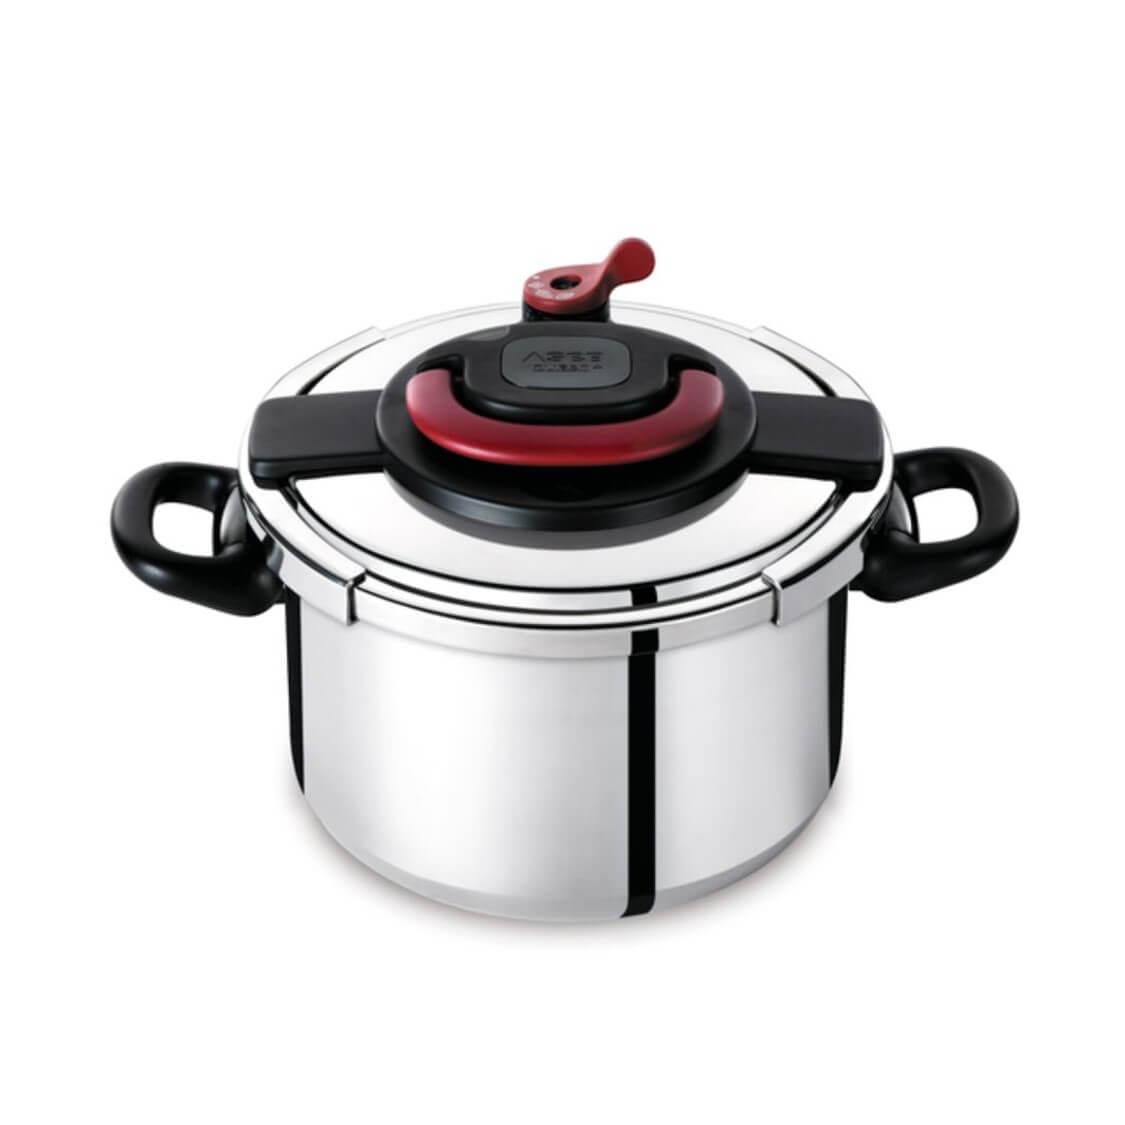 Tefal Clipso Minut Easy 4.5 L / P4620666 - Karout Online -Karout Online Shopping In lebanon - Karout Express Delivery 